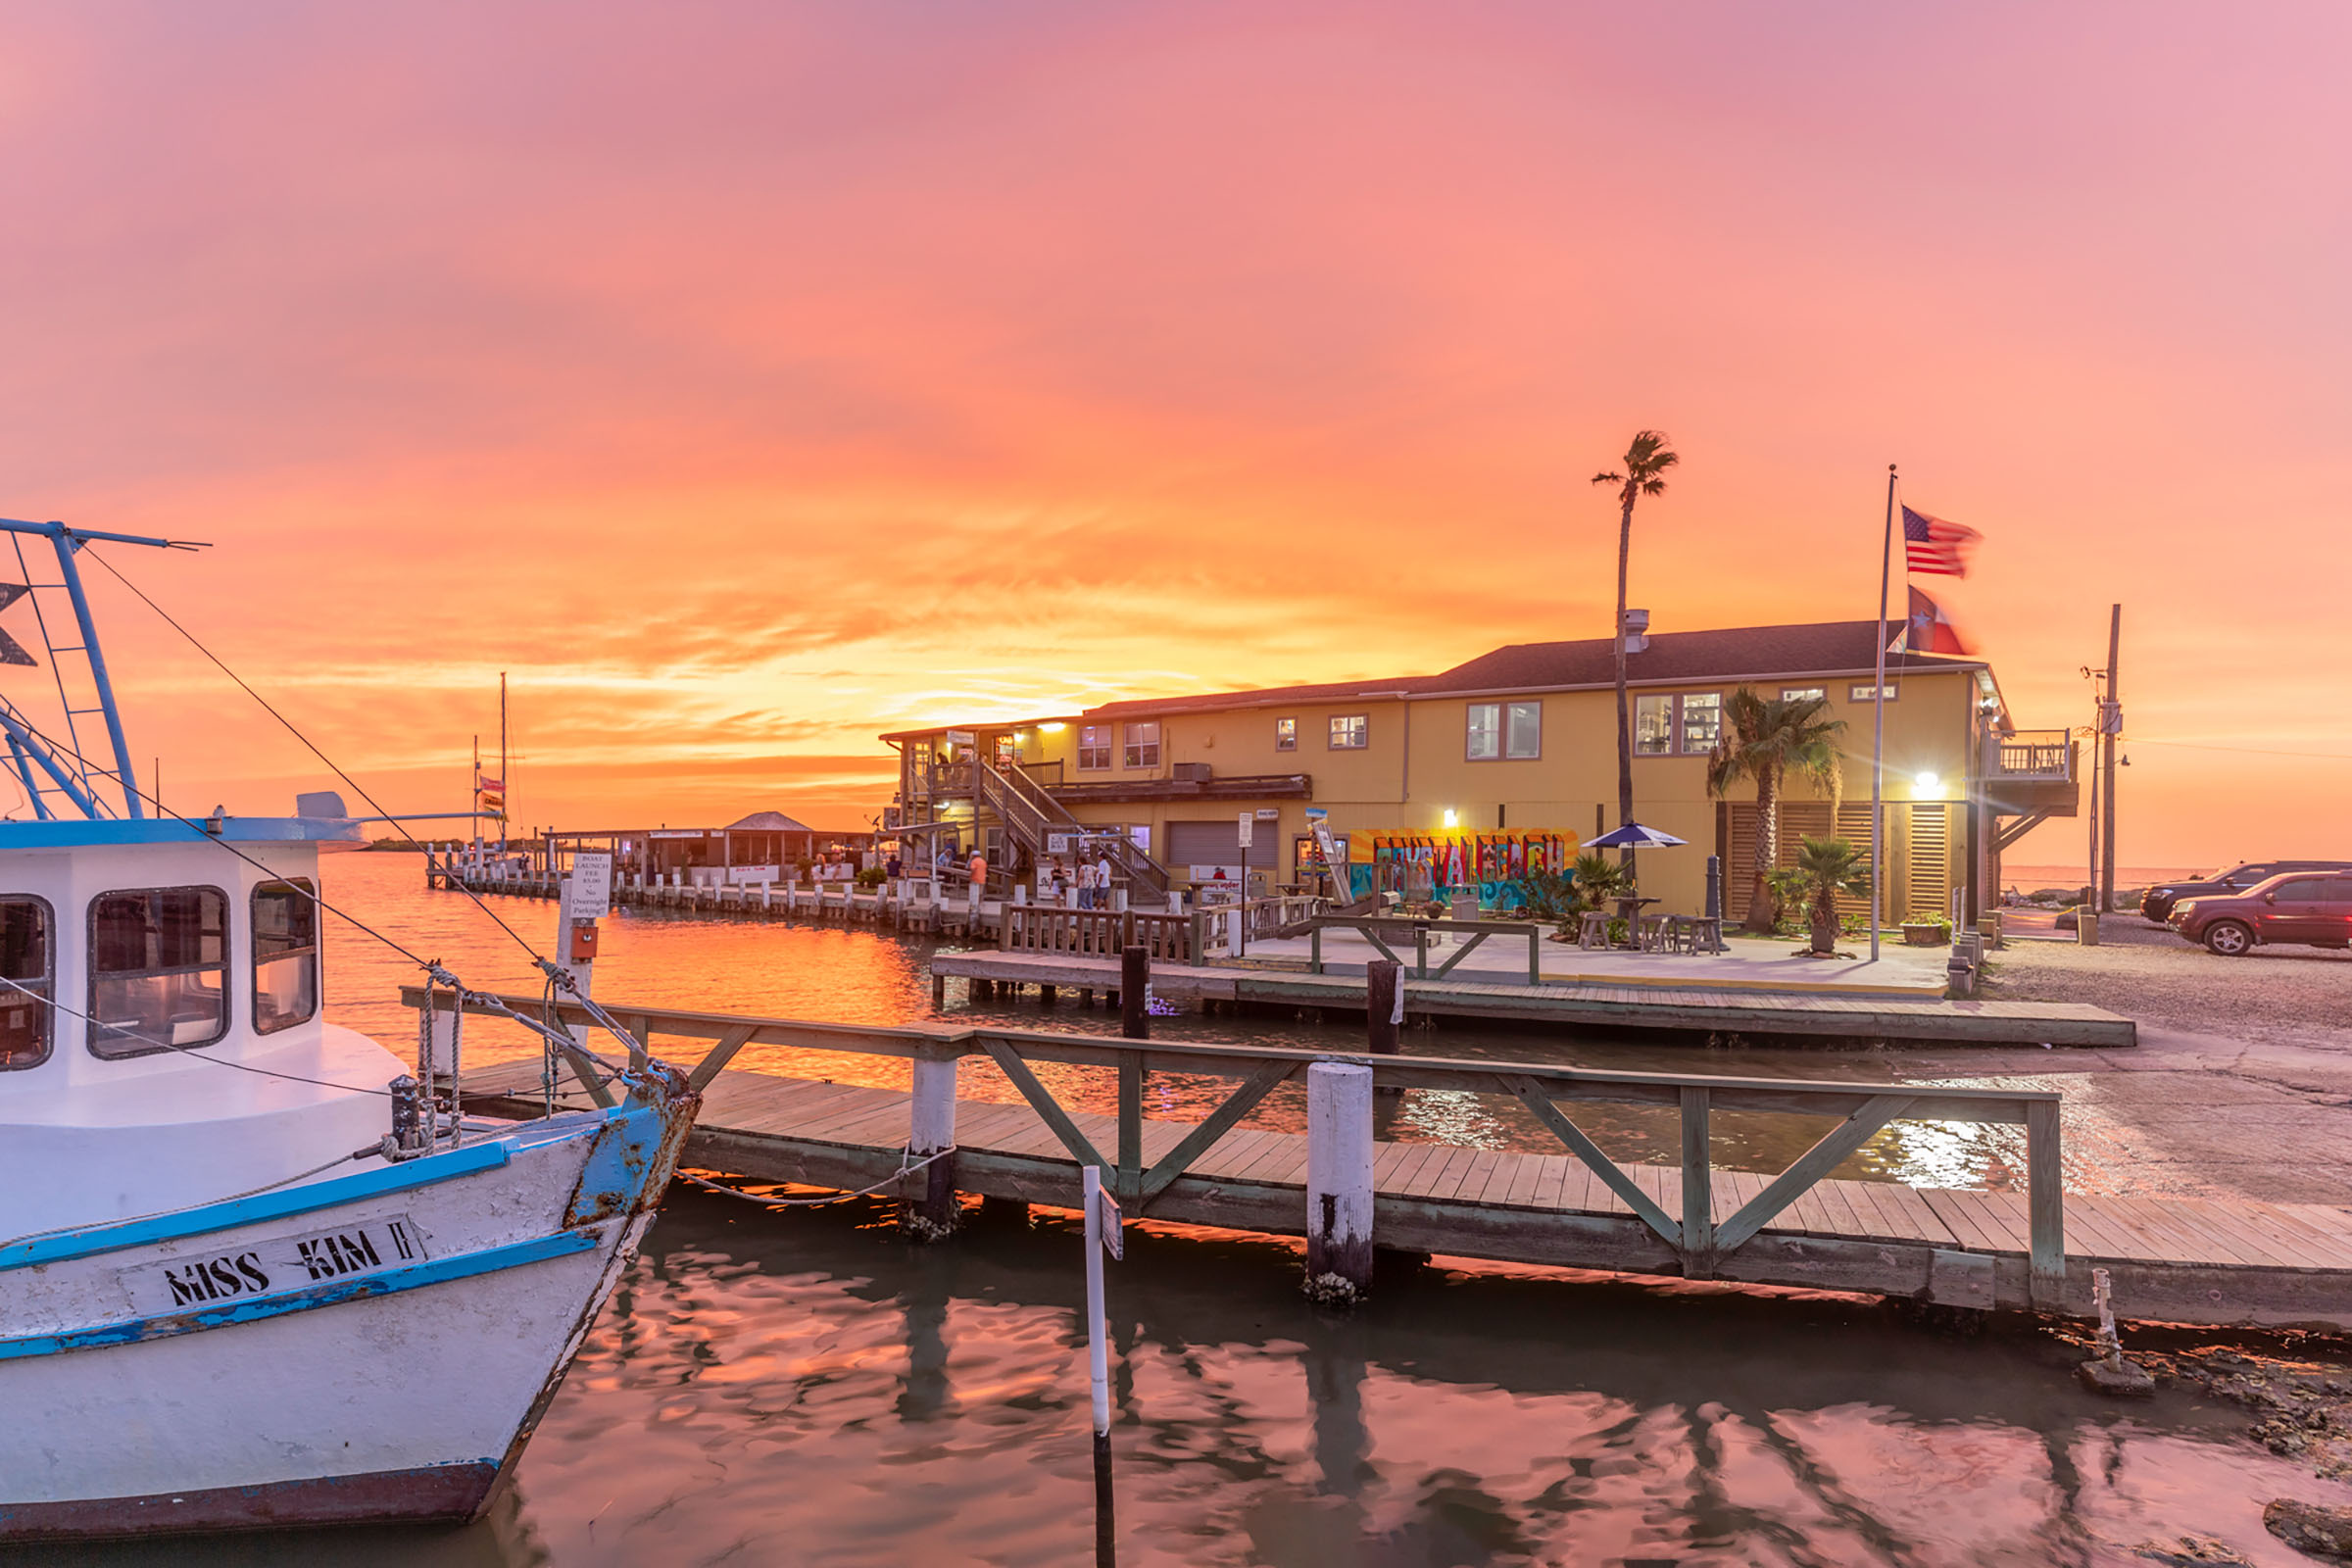 A wide shot of a building and boat on the water with a sunset in the background